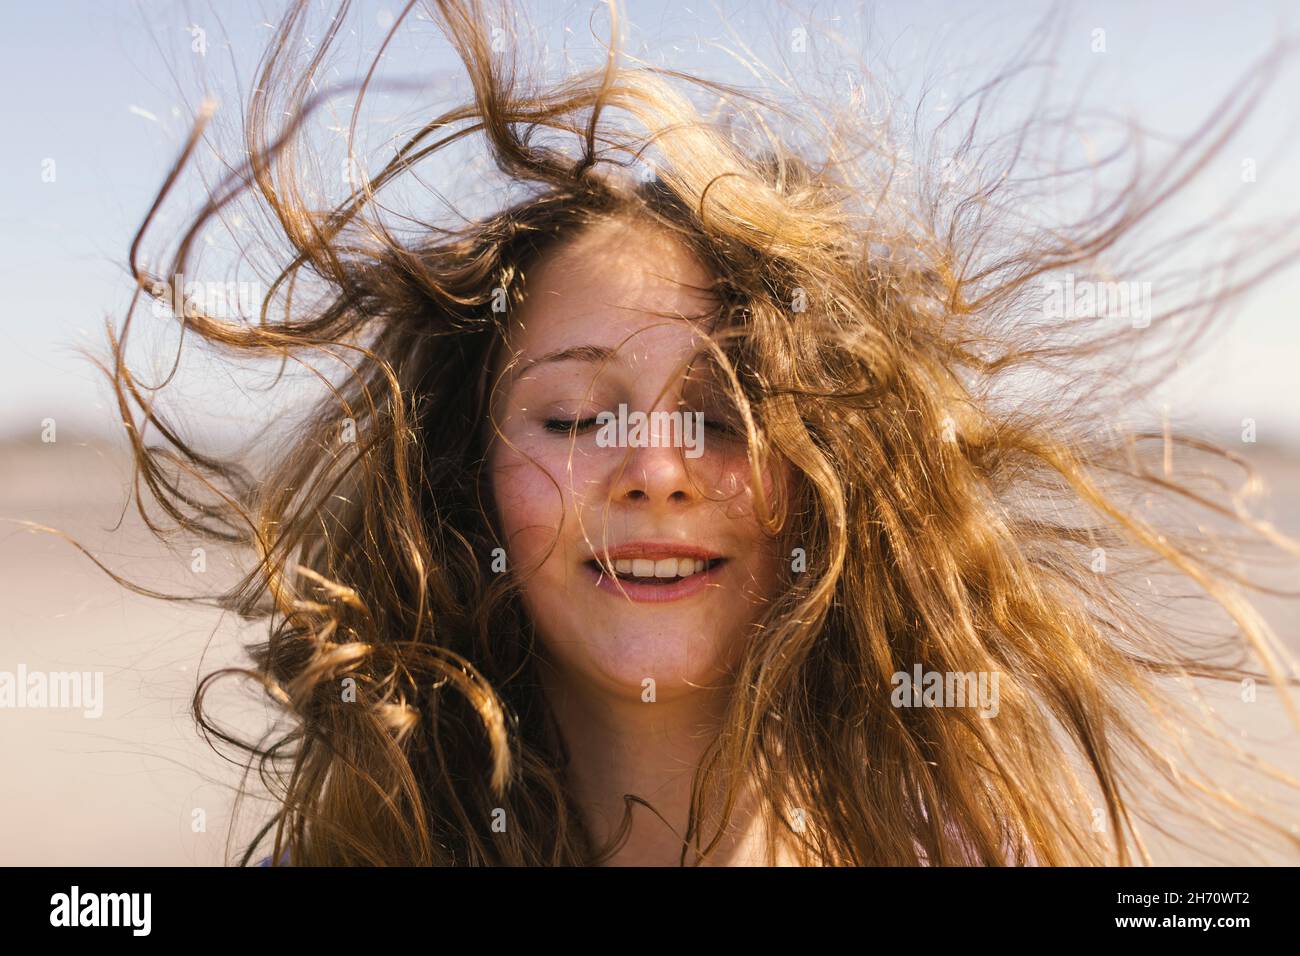 Portrait of teenage girl with messy hair Stock Photo